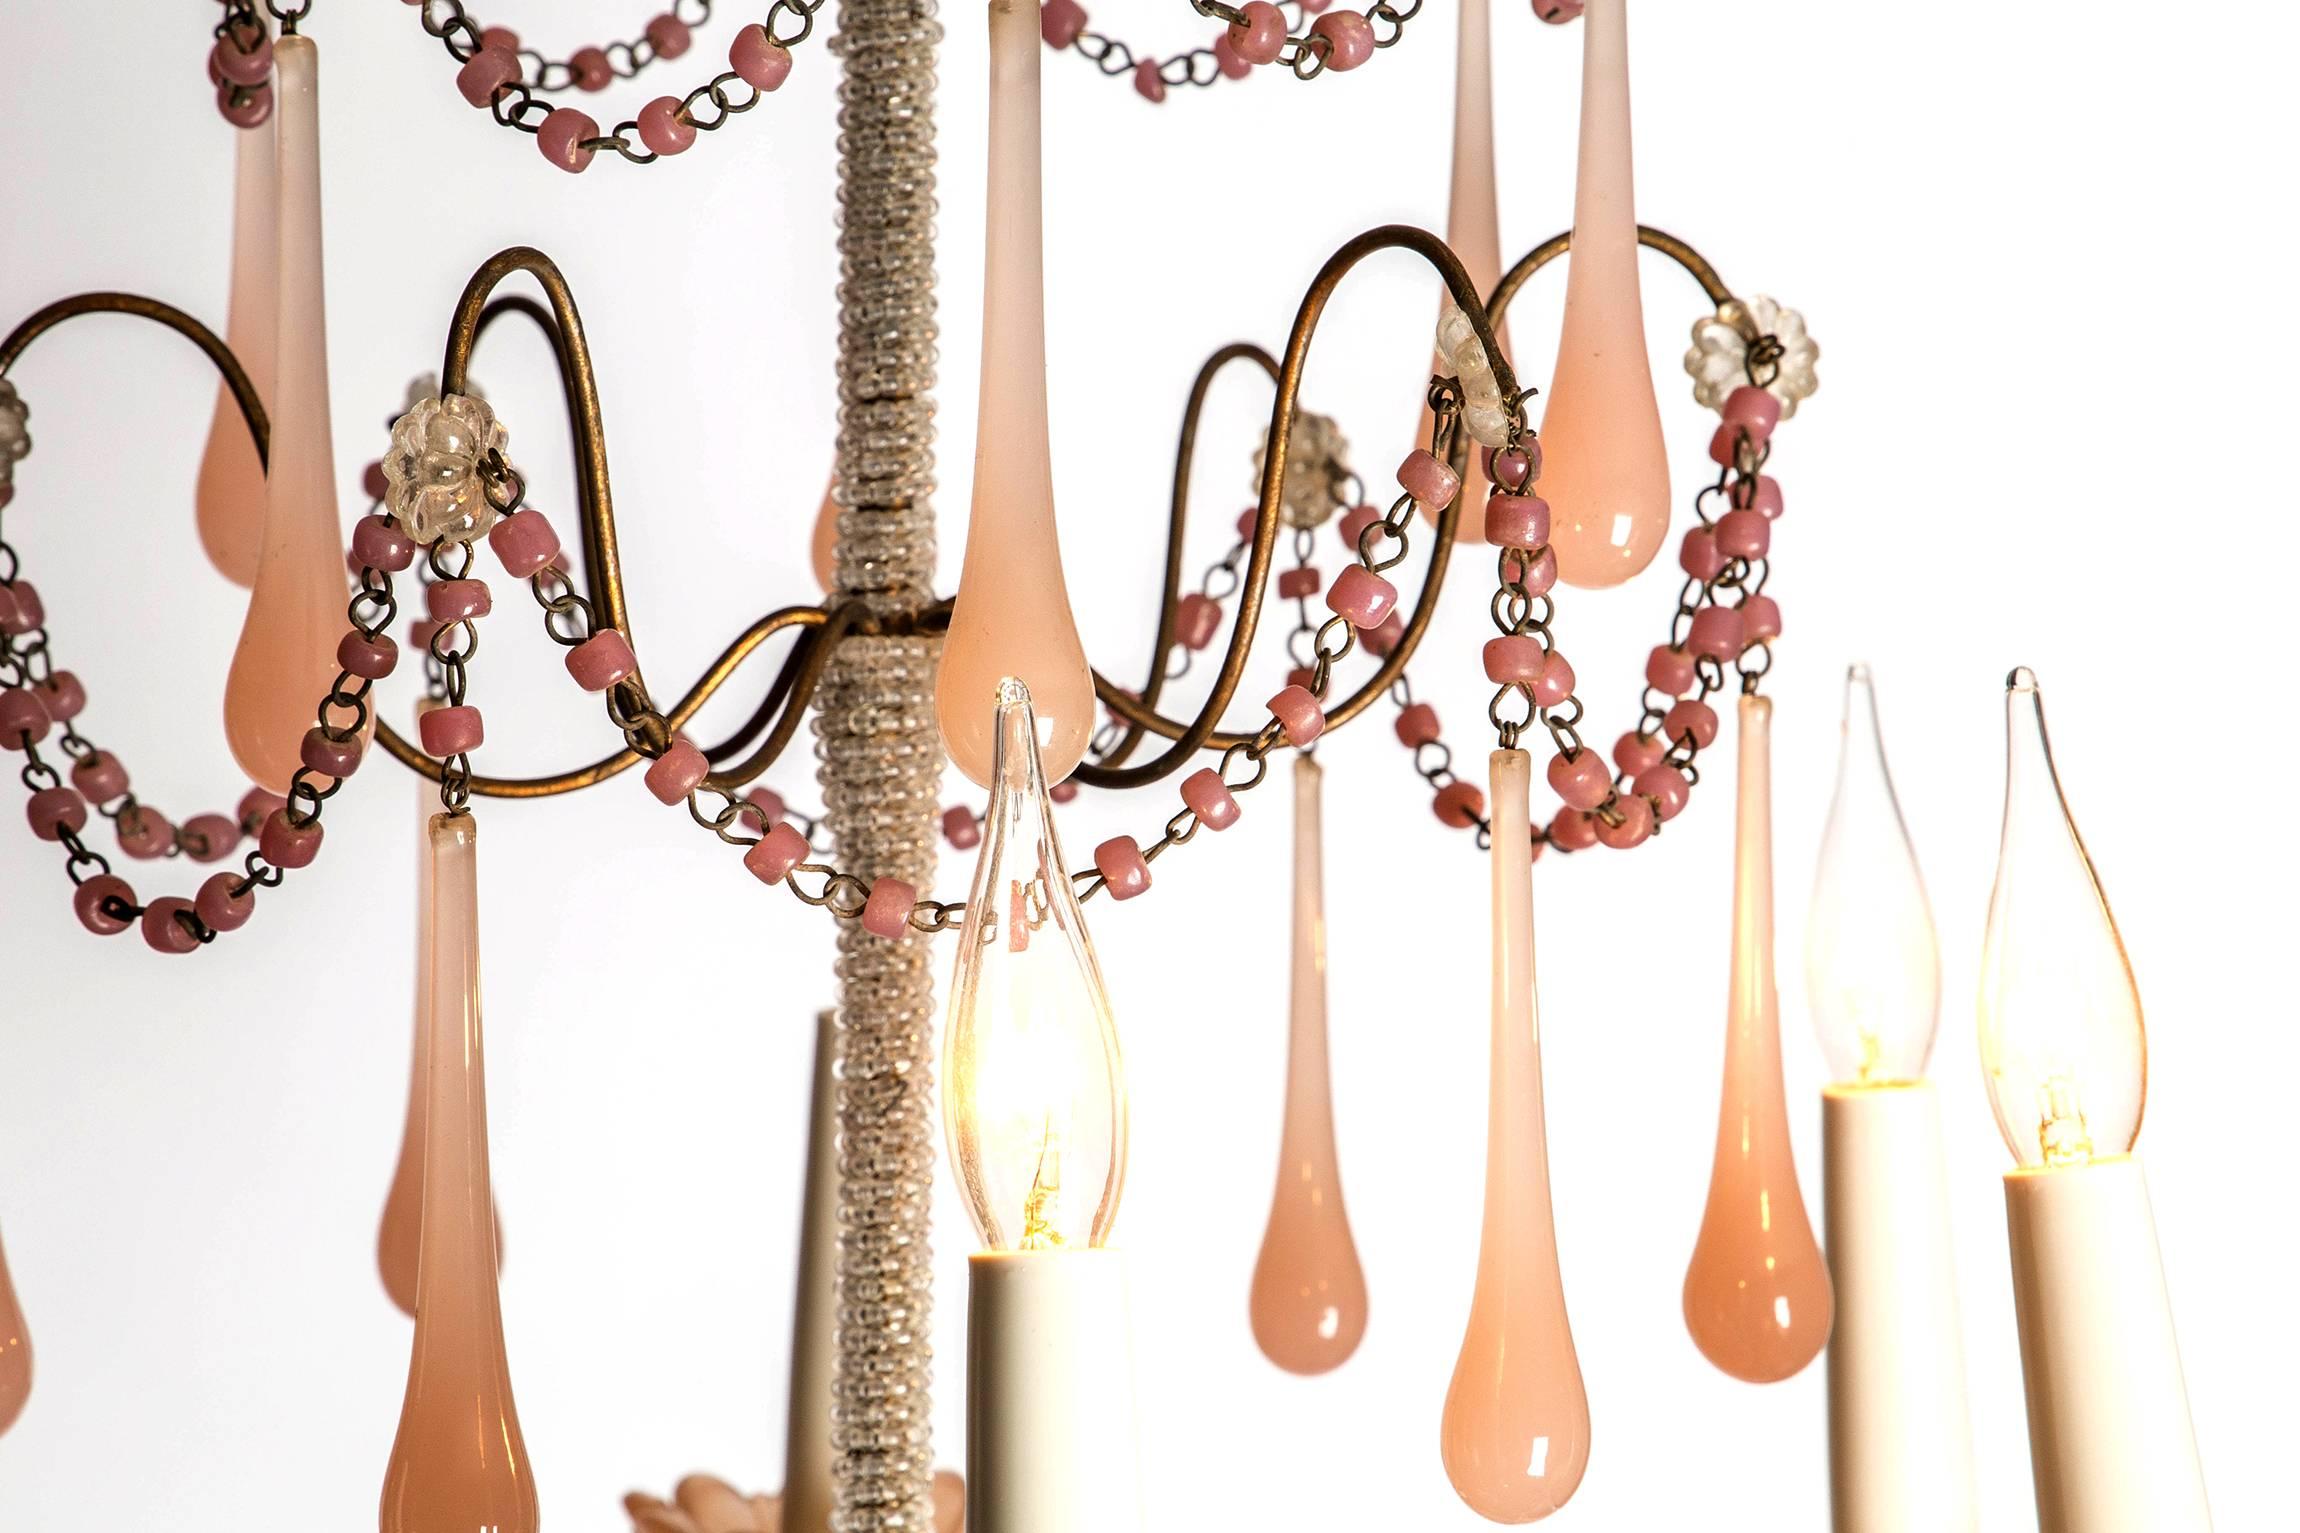 Italian Boudoir Chandelier with Handblown Rose Glass Droplets and Beads, circa 1920